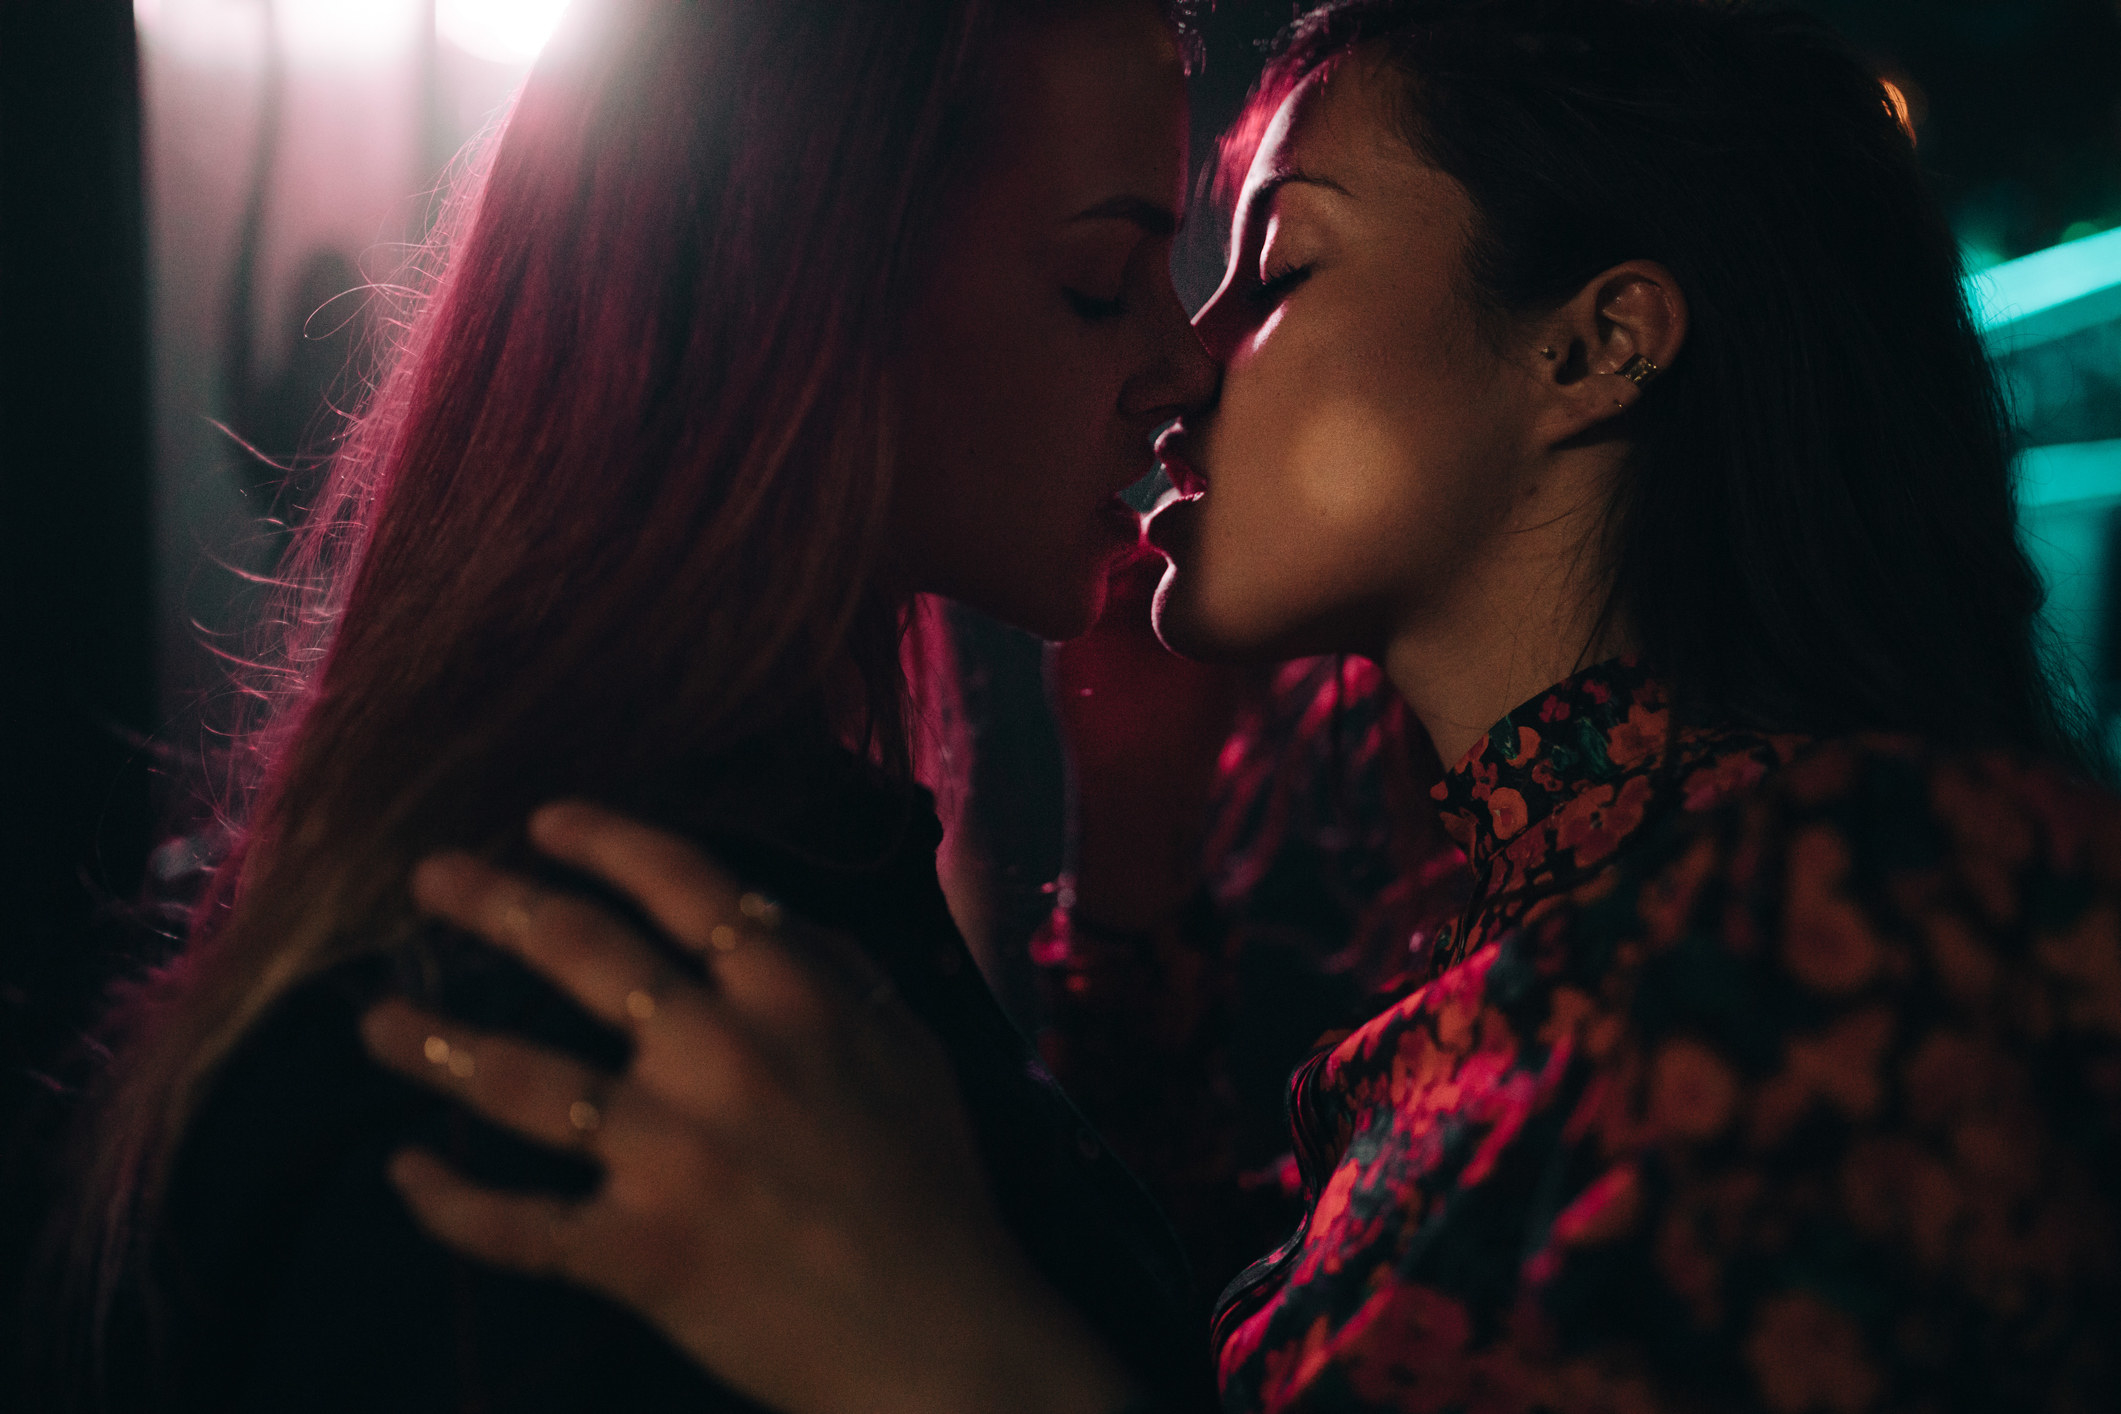 An image of two women kissing